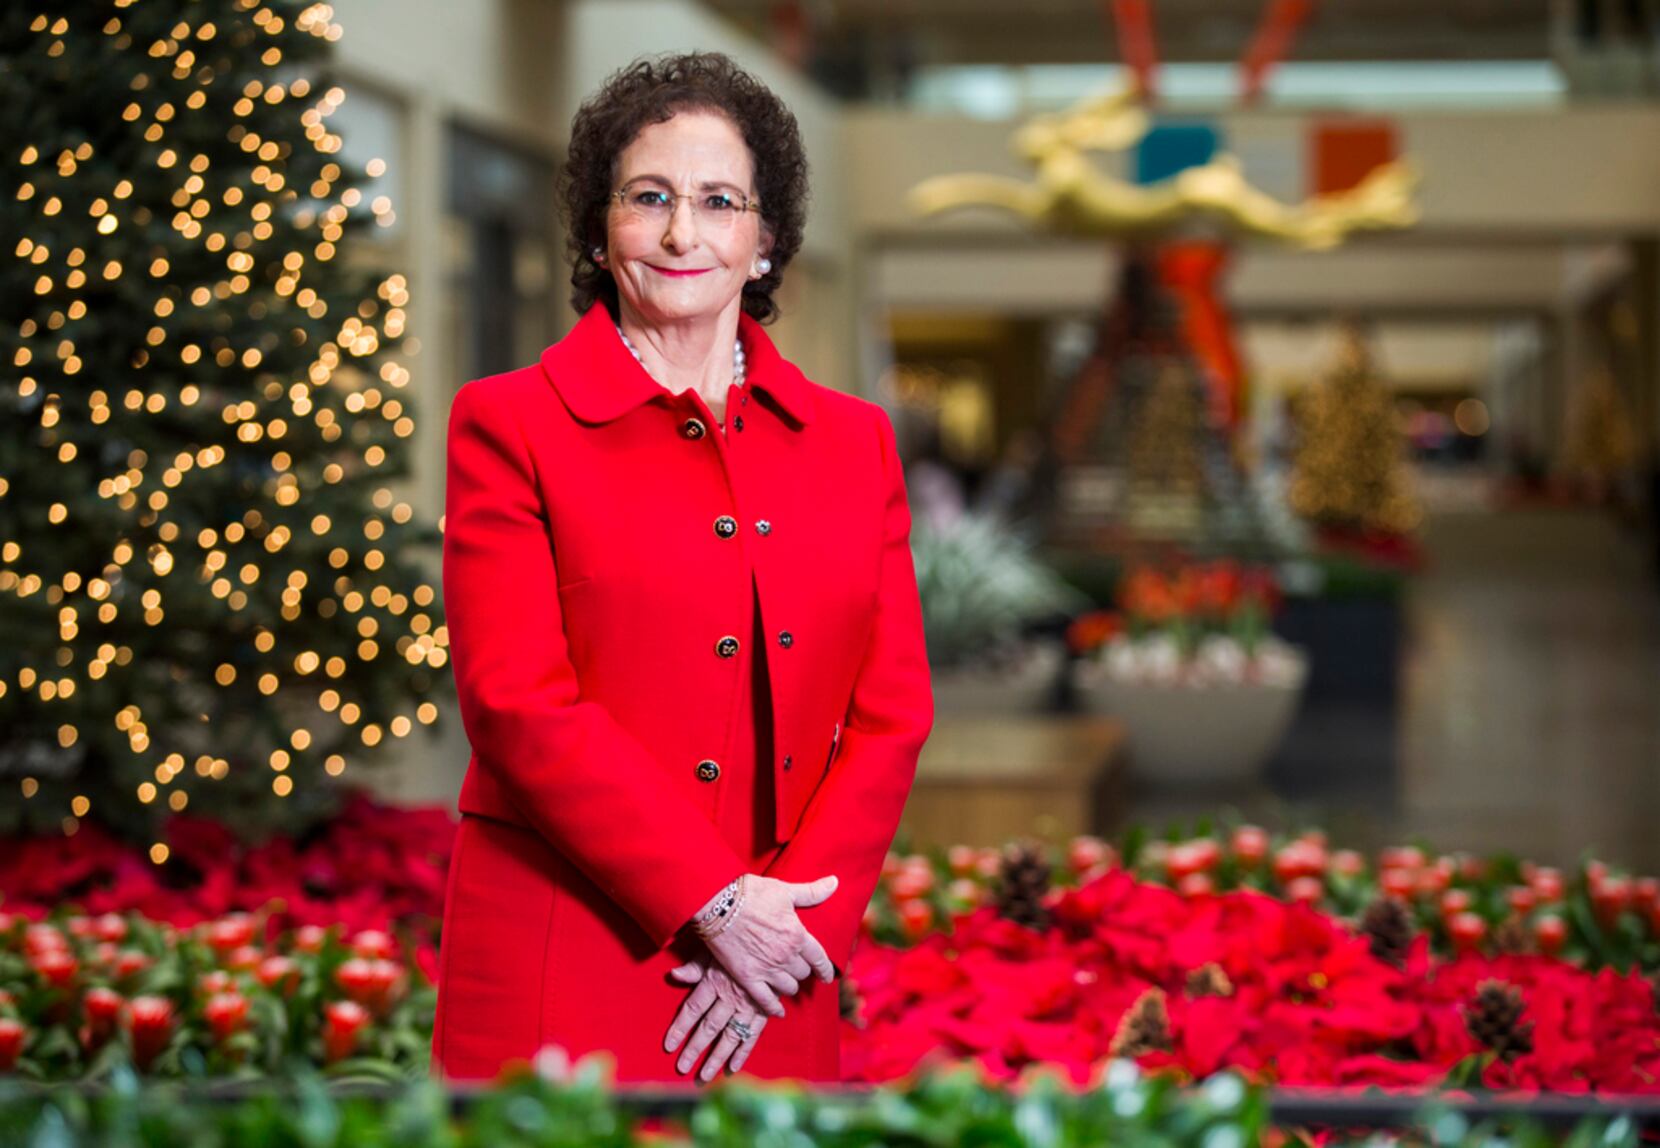 She made NorthPark's landscaping the envy of malls. Her death